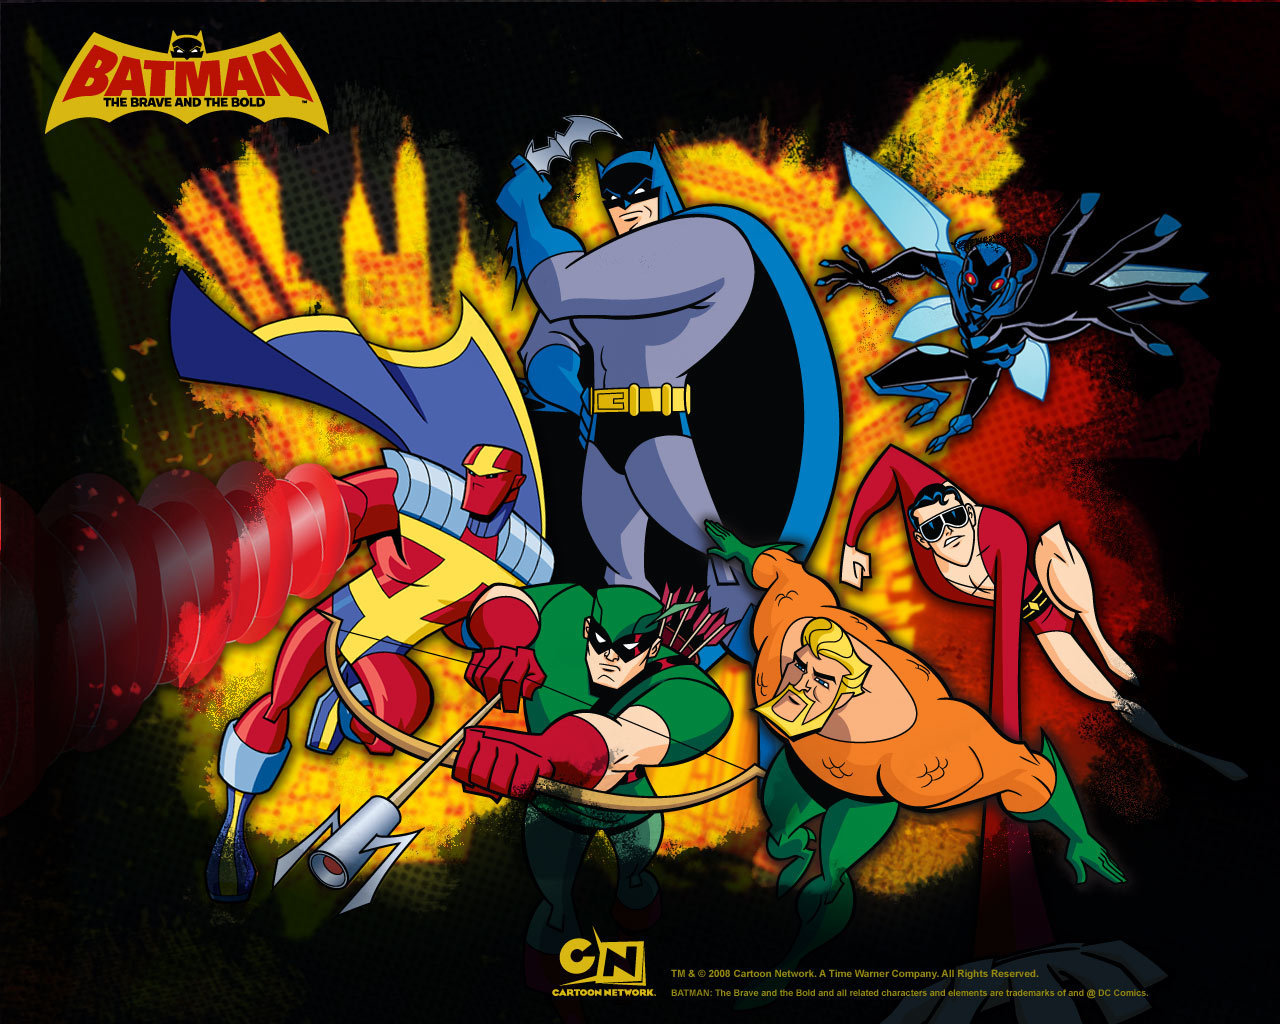 Batman the Brave and the Bold aired 5 years ago | NeoGAF